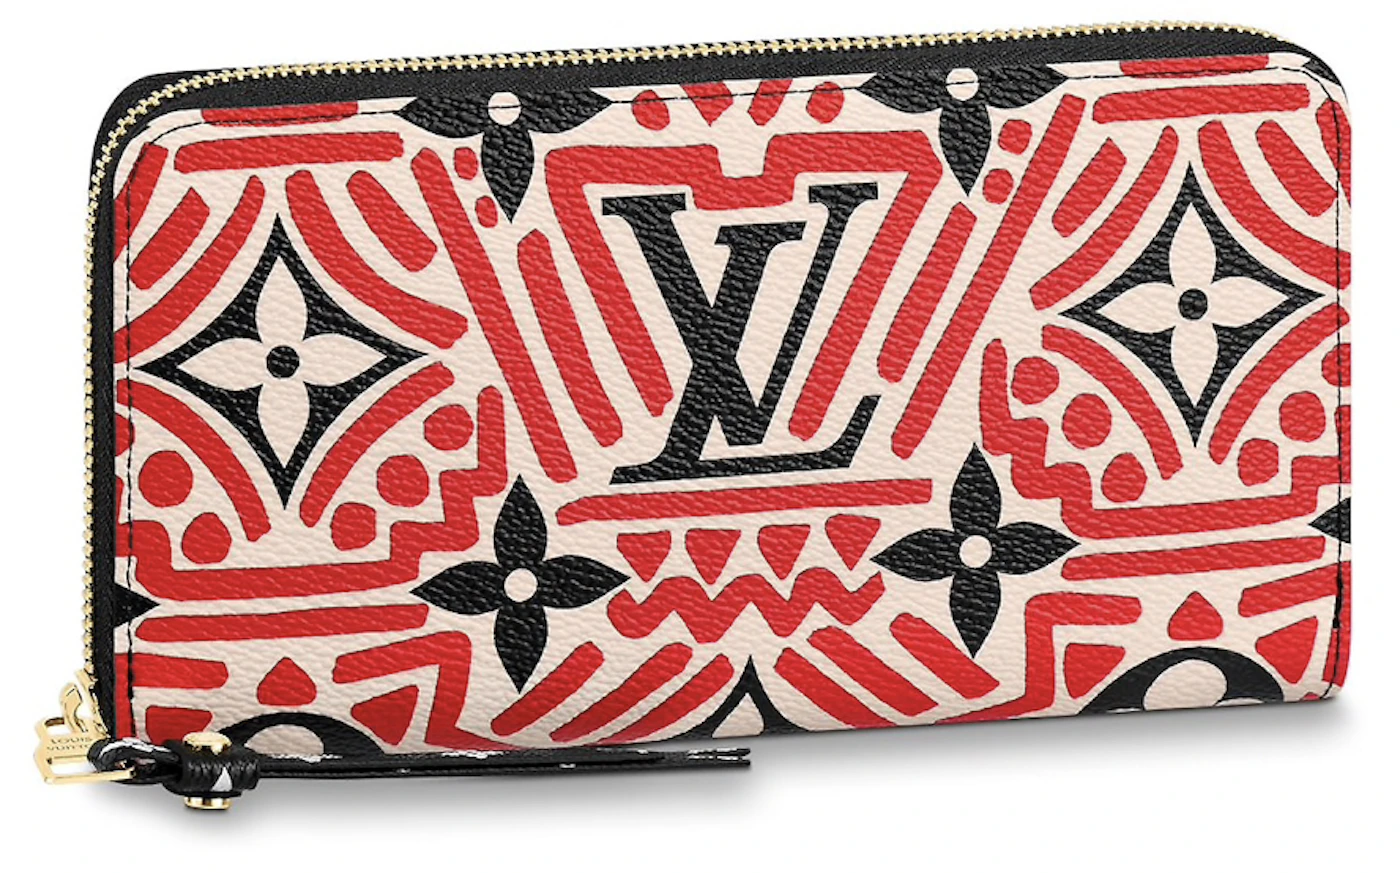 Louis Vuitton Red, Black, And White Giant Monogram Crafty Coated